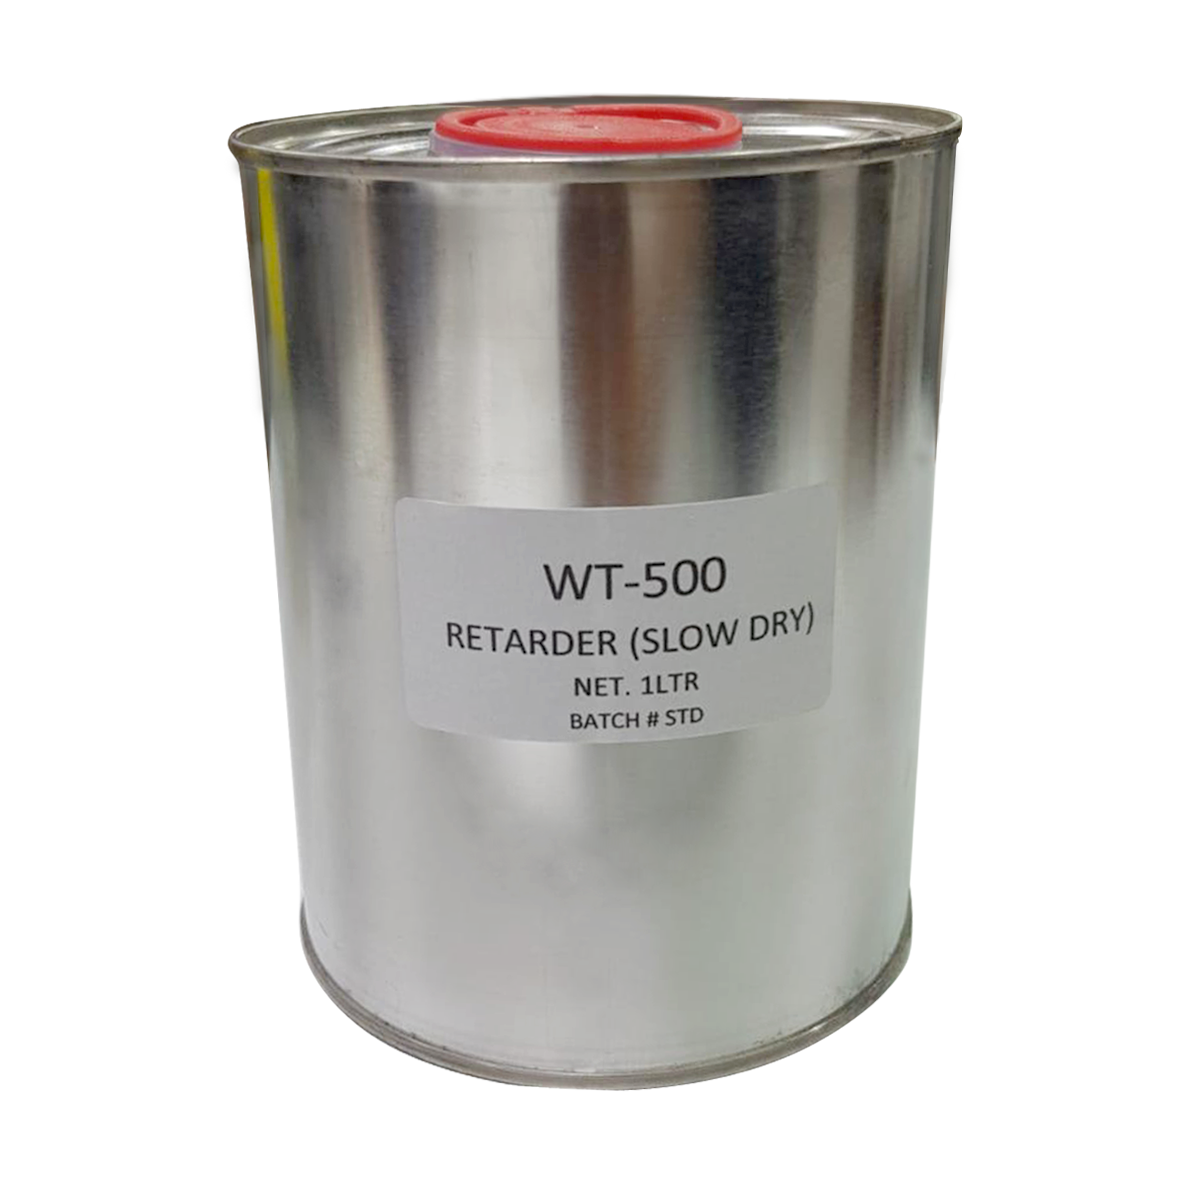 RETARDER FOR PVC AND METAL INKS